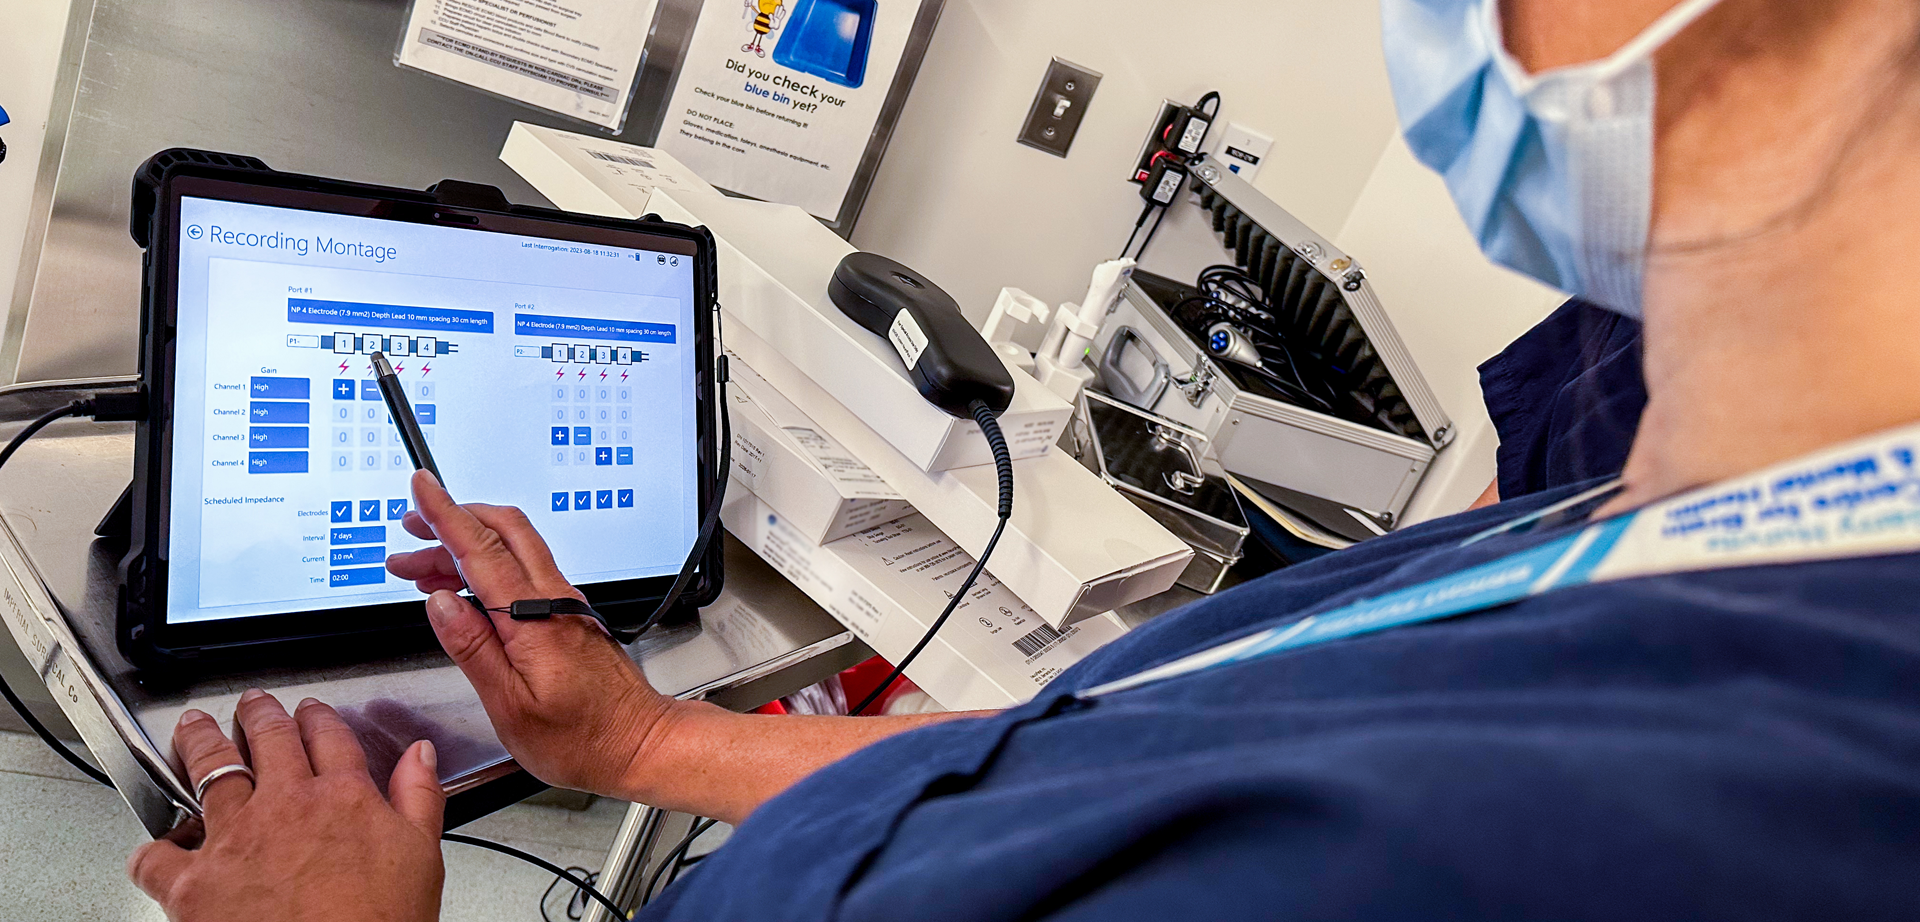 A person in hospital wear pointing to an interface displayed on an iPad.